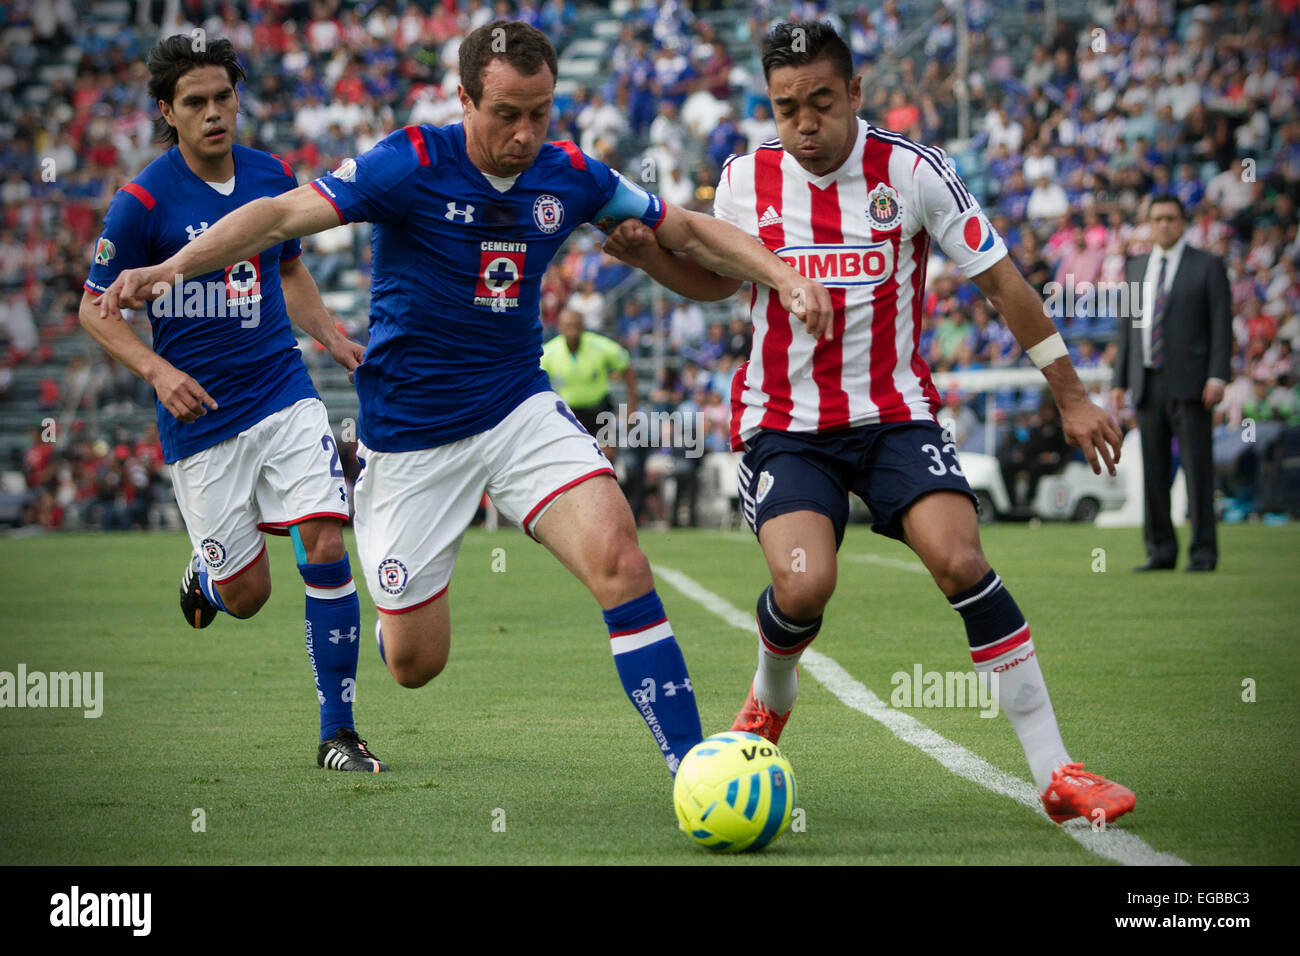 Mexico City, Mexico. 21st Feb, 2015. Cruz Azul's Gerardo Torrado (C) vies for the ball with Marco Fabian (R) of Chivas during the match of the 2015 Closing Tournament of MX League in the Azul Stadium in Mexico City, capital of Mexico, on Feb. 21, 2015. © Alejandro Ayala/Xinhua/Alamy Live News Stock Photo